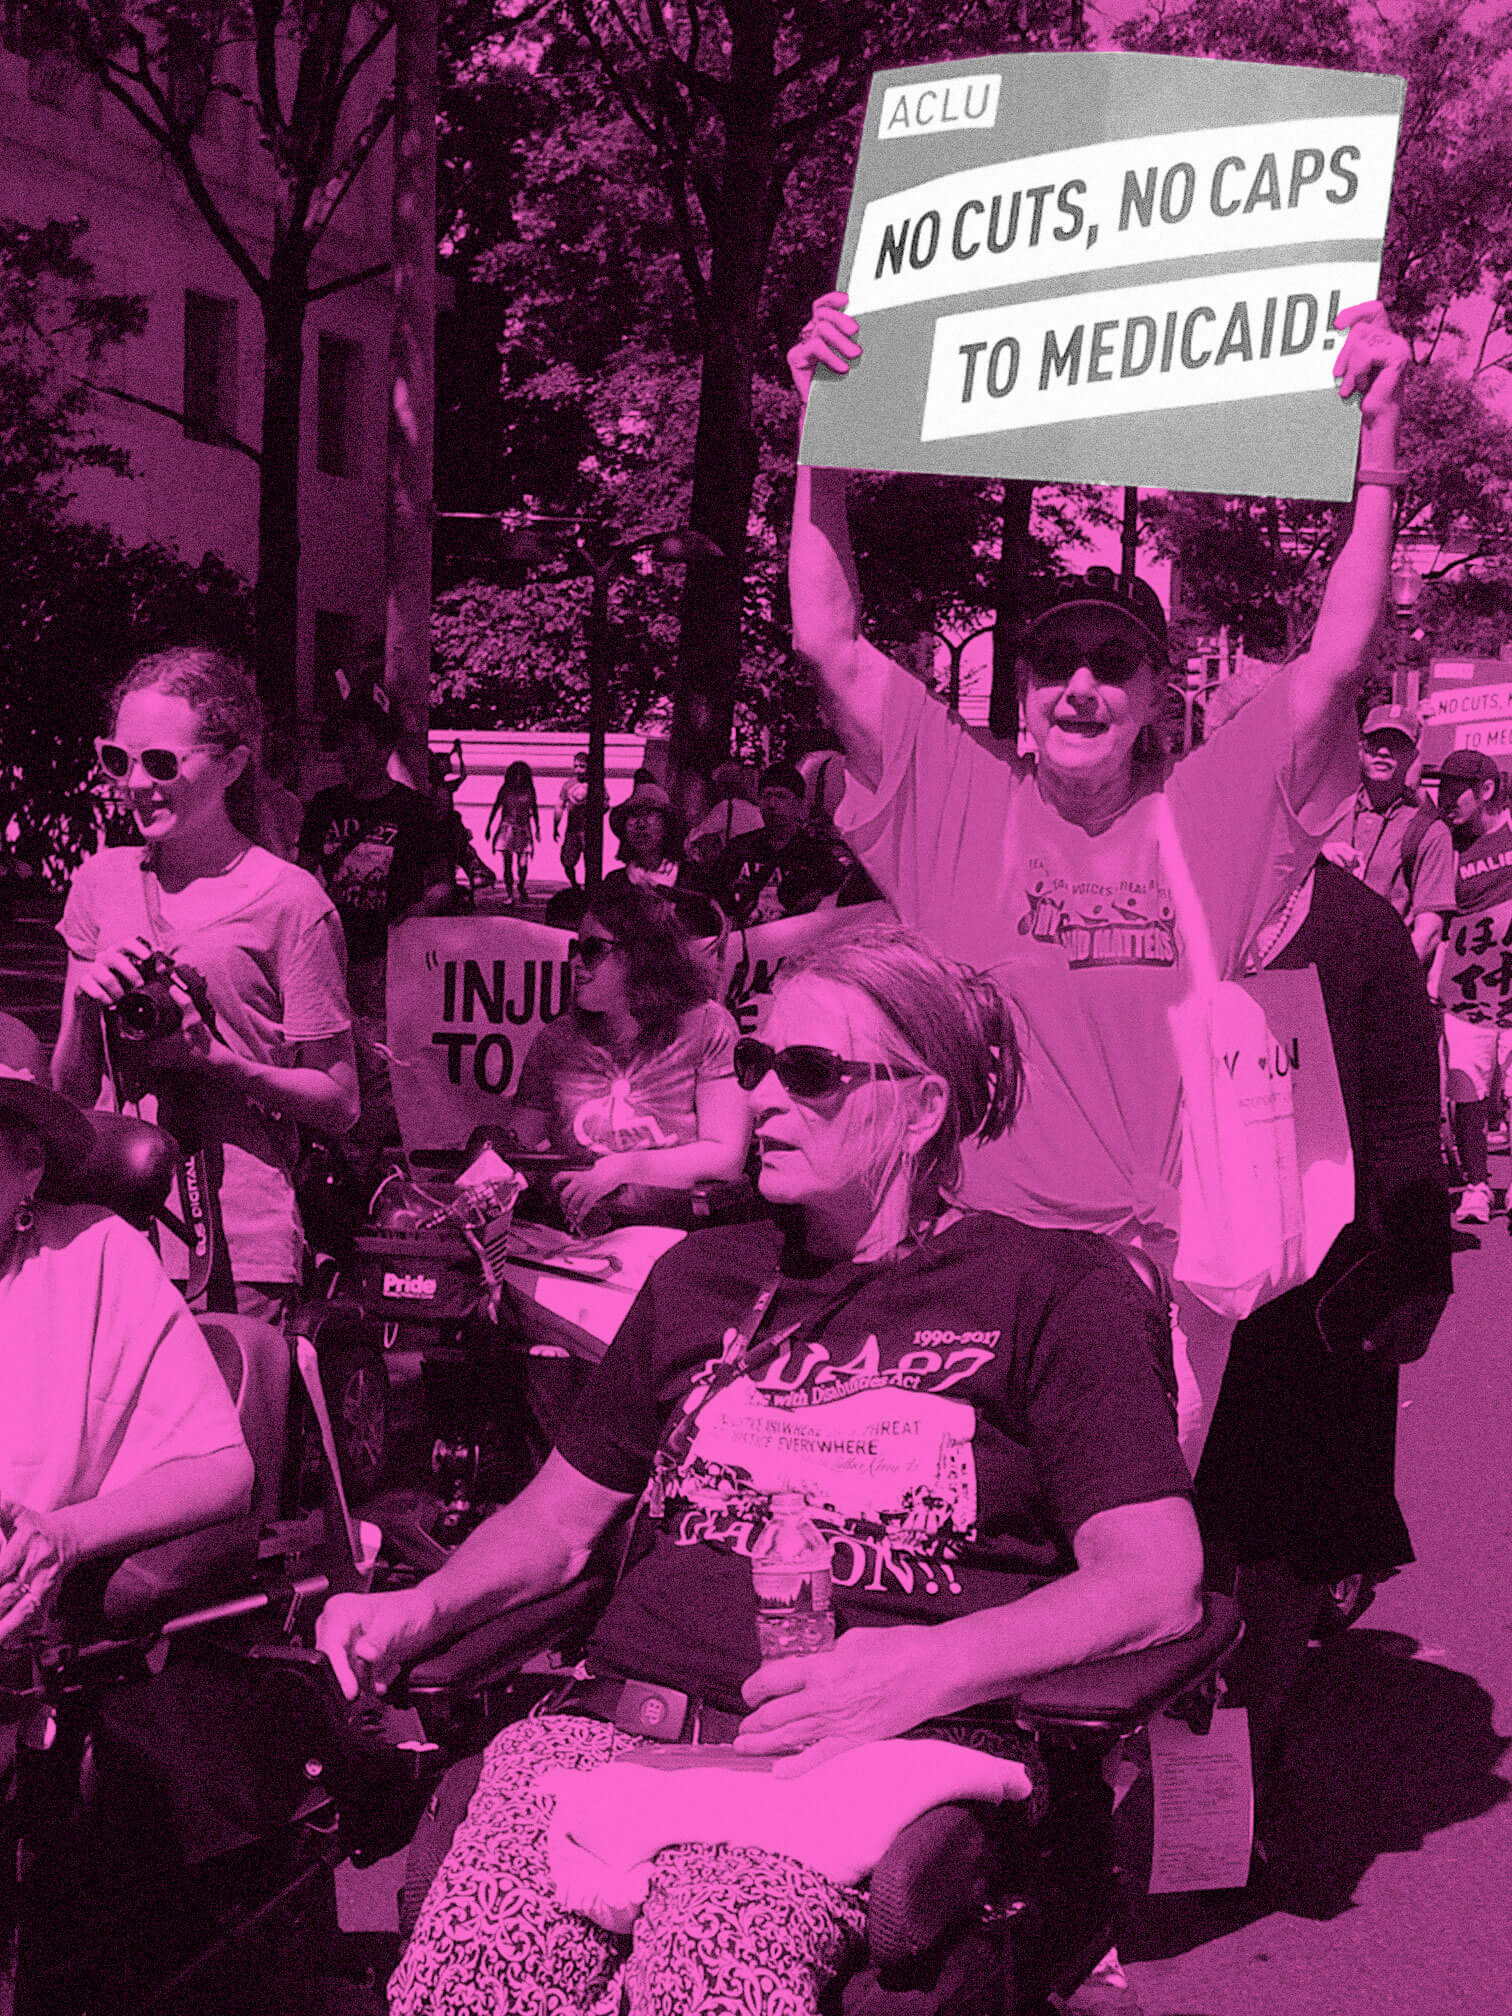 Disability rights activists rally at Capitol Hill, including women using wheelchairs. A woman in the crowd raises a sign that says, “ACLU NO CUTS, NO CAPS TO MEDICAID!” The image is filtered in neon pink, while the protest sign is filtered in gray and white.